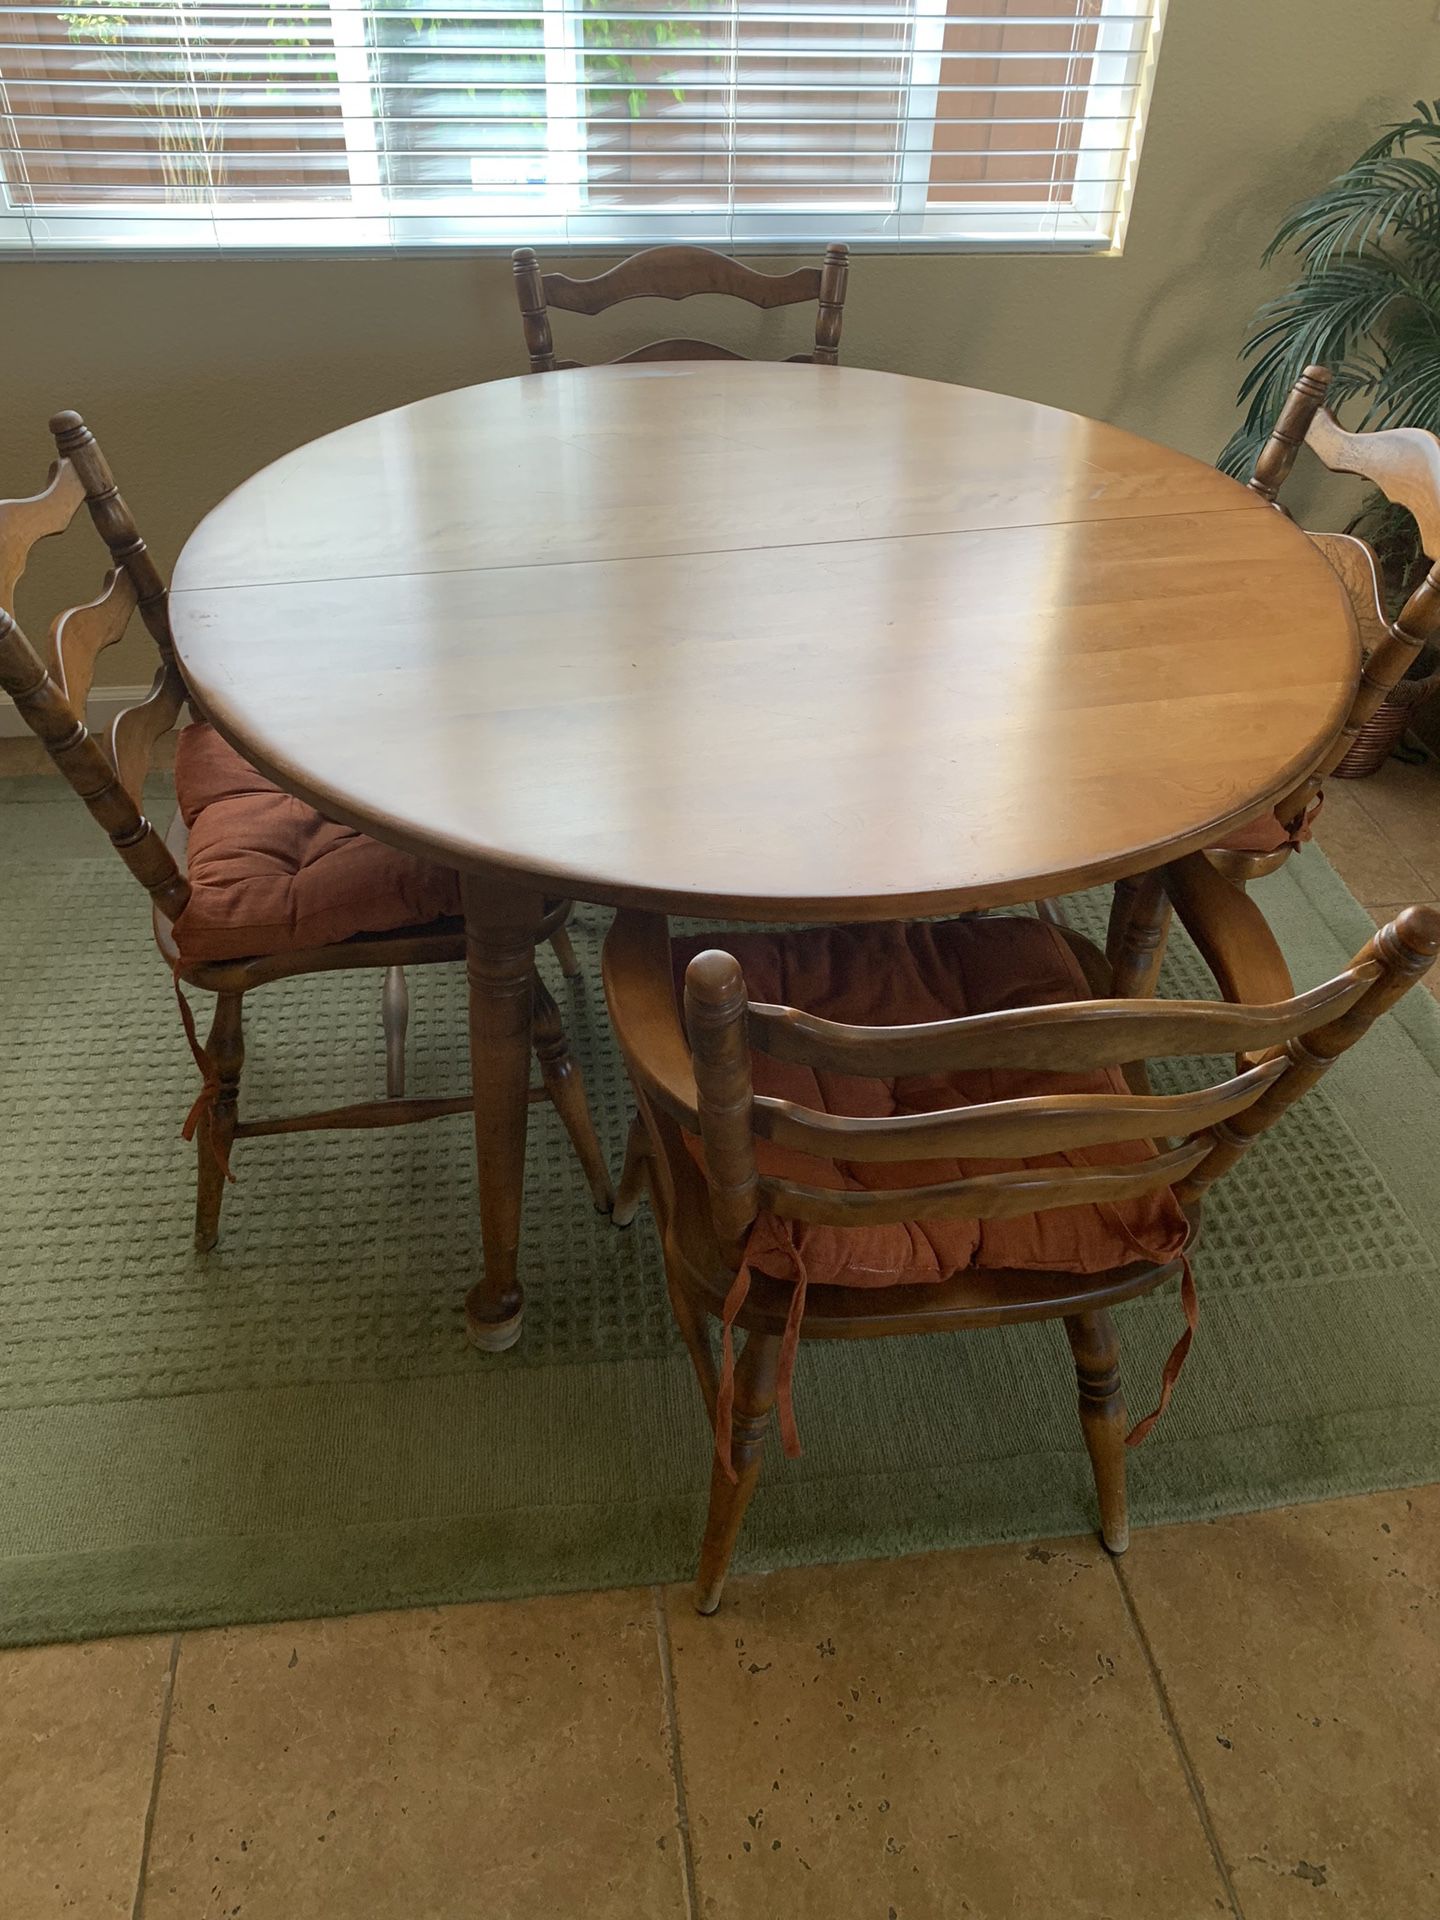 Kitchen maple table and 4 chairs